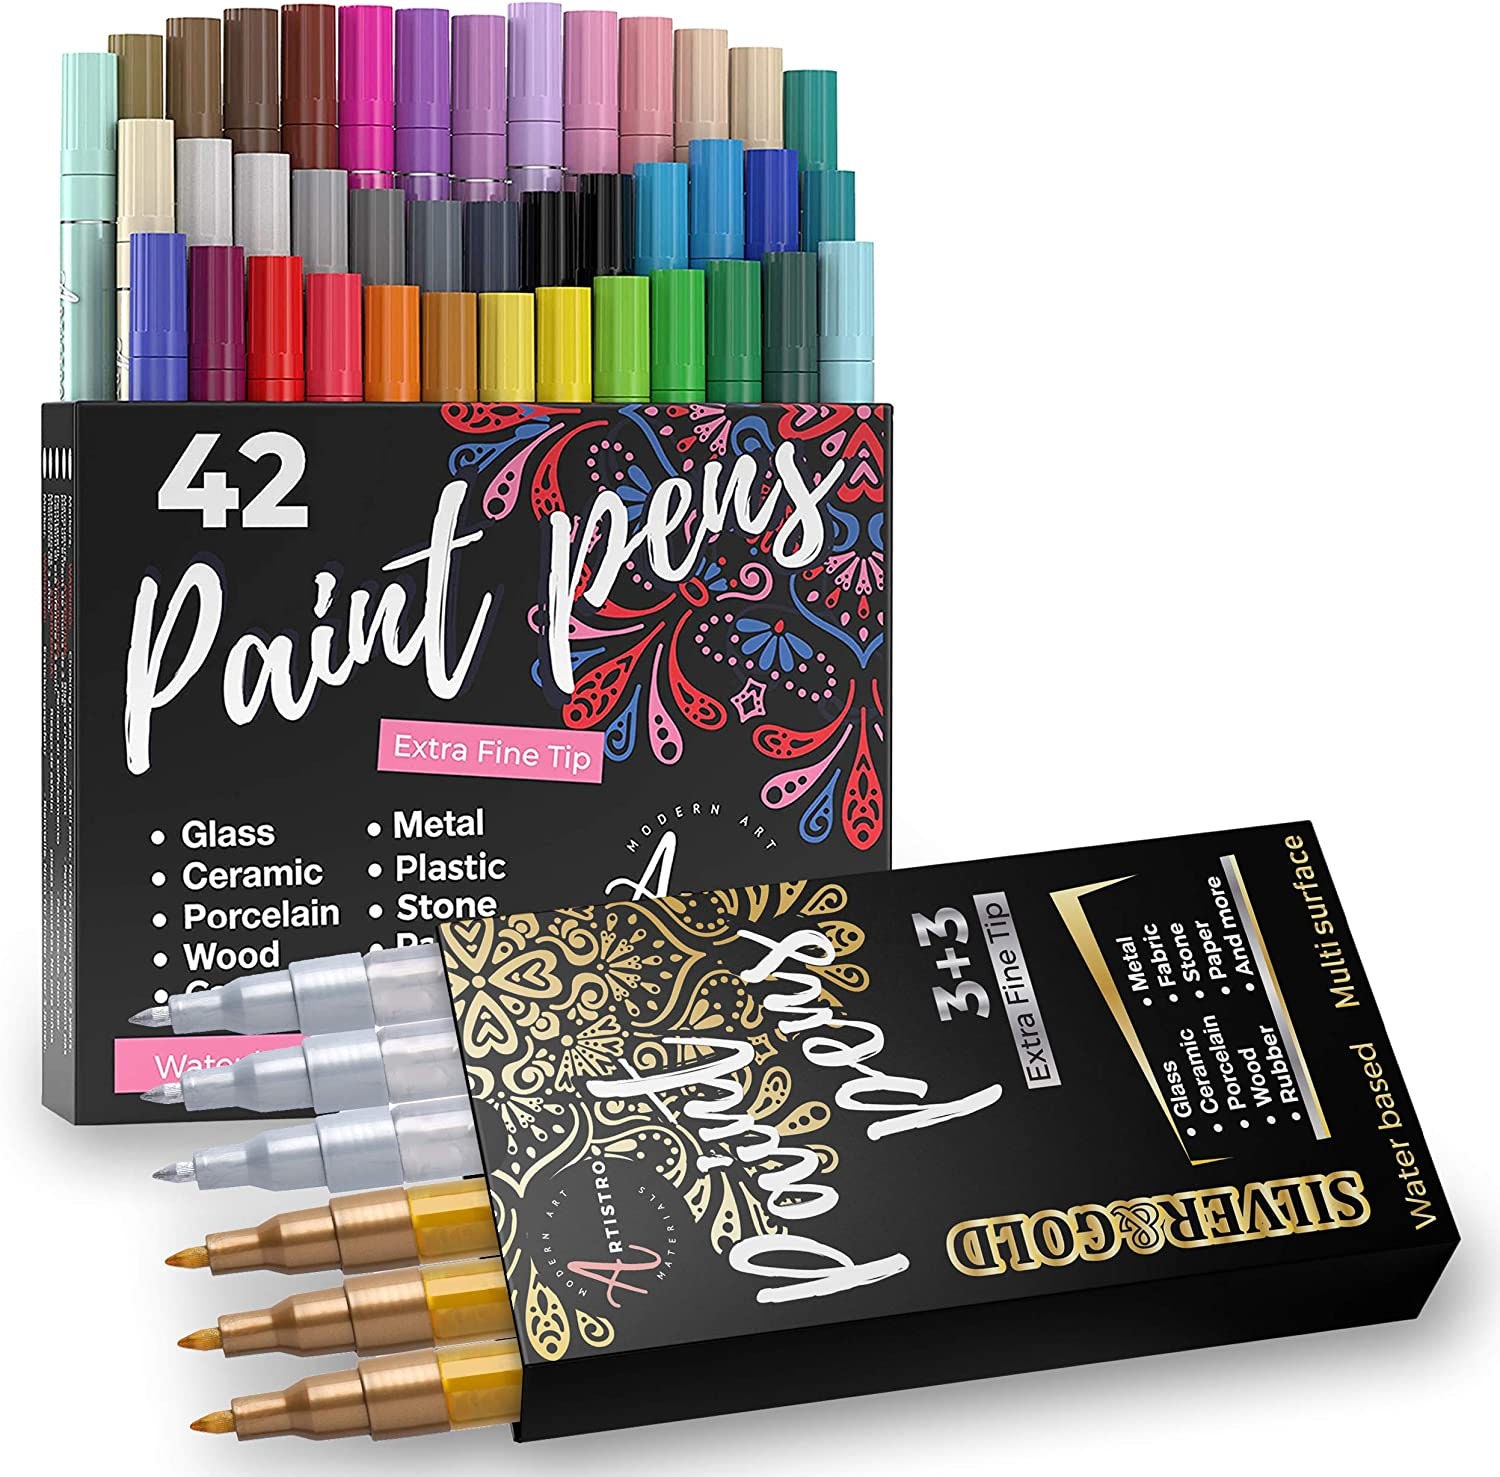 45 Artistro Acrylic Paint Pens 30 Medium 15 Fine Tip Markers Set for Kids  Craft, Family Painting, Rock Painting, Artist Gifts, Wood Art 